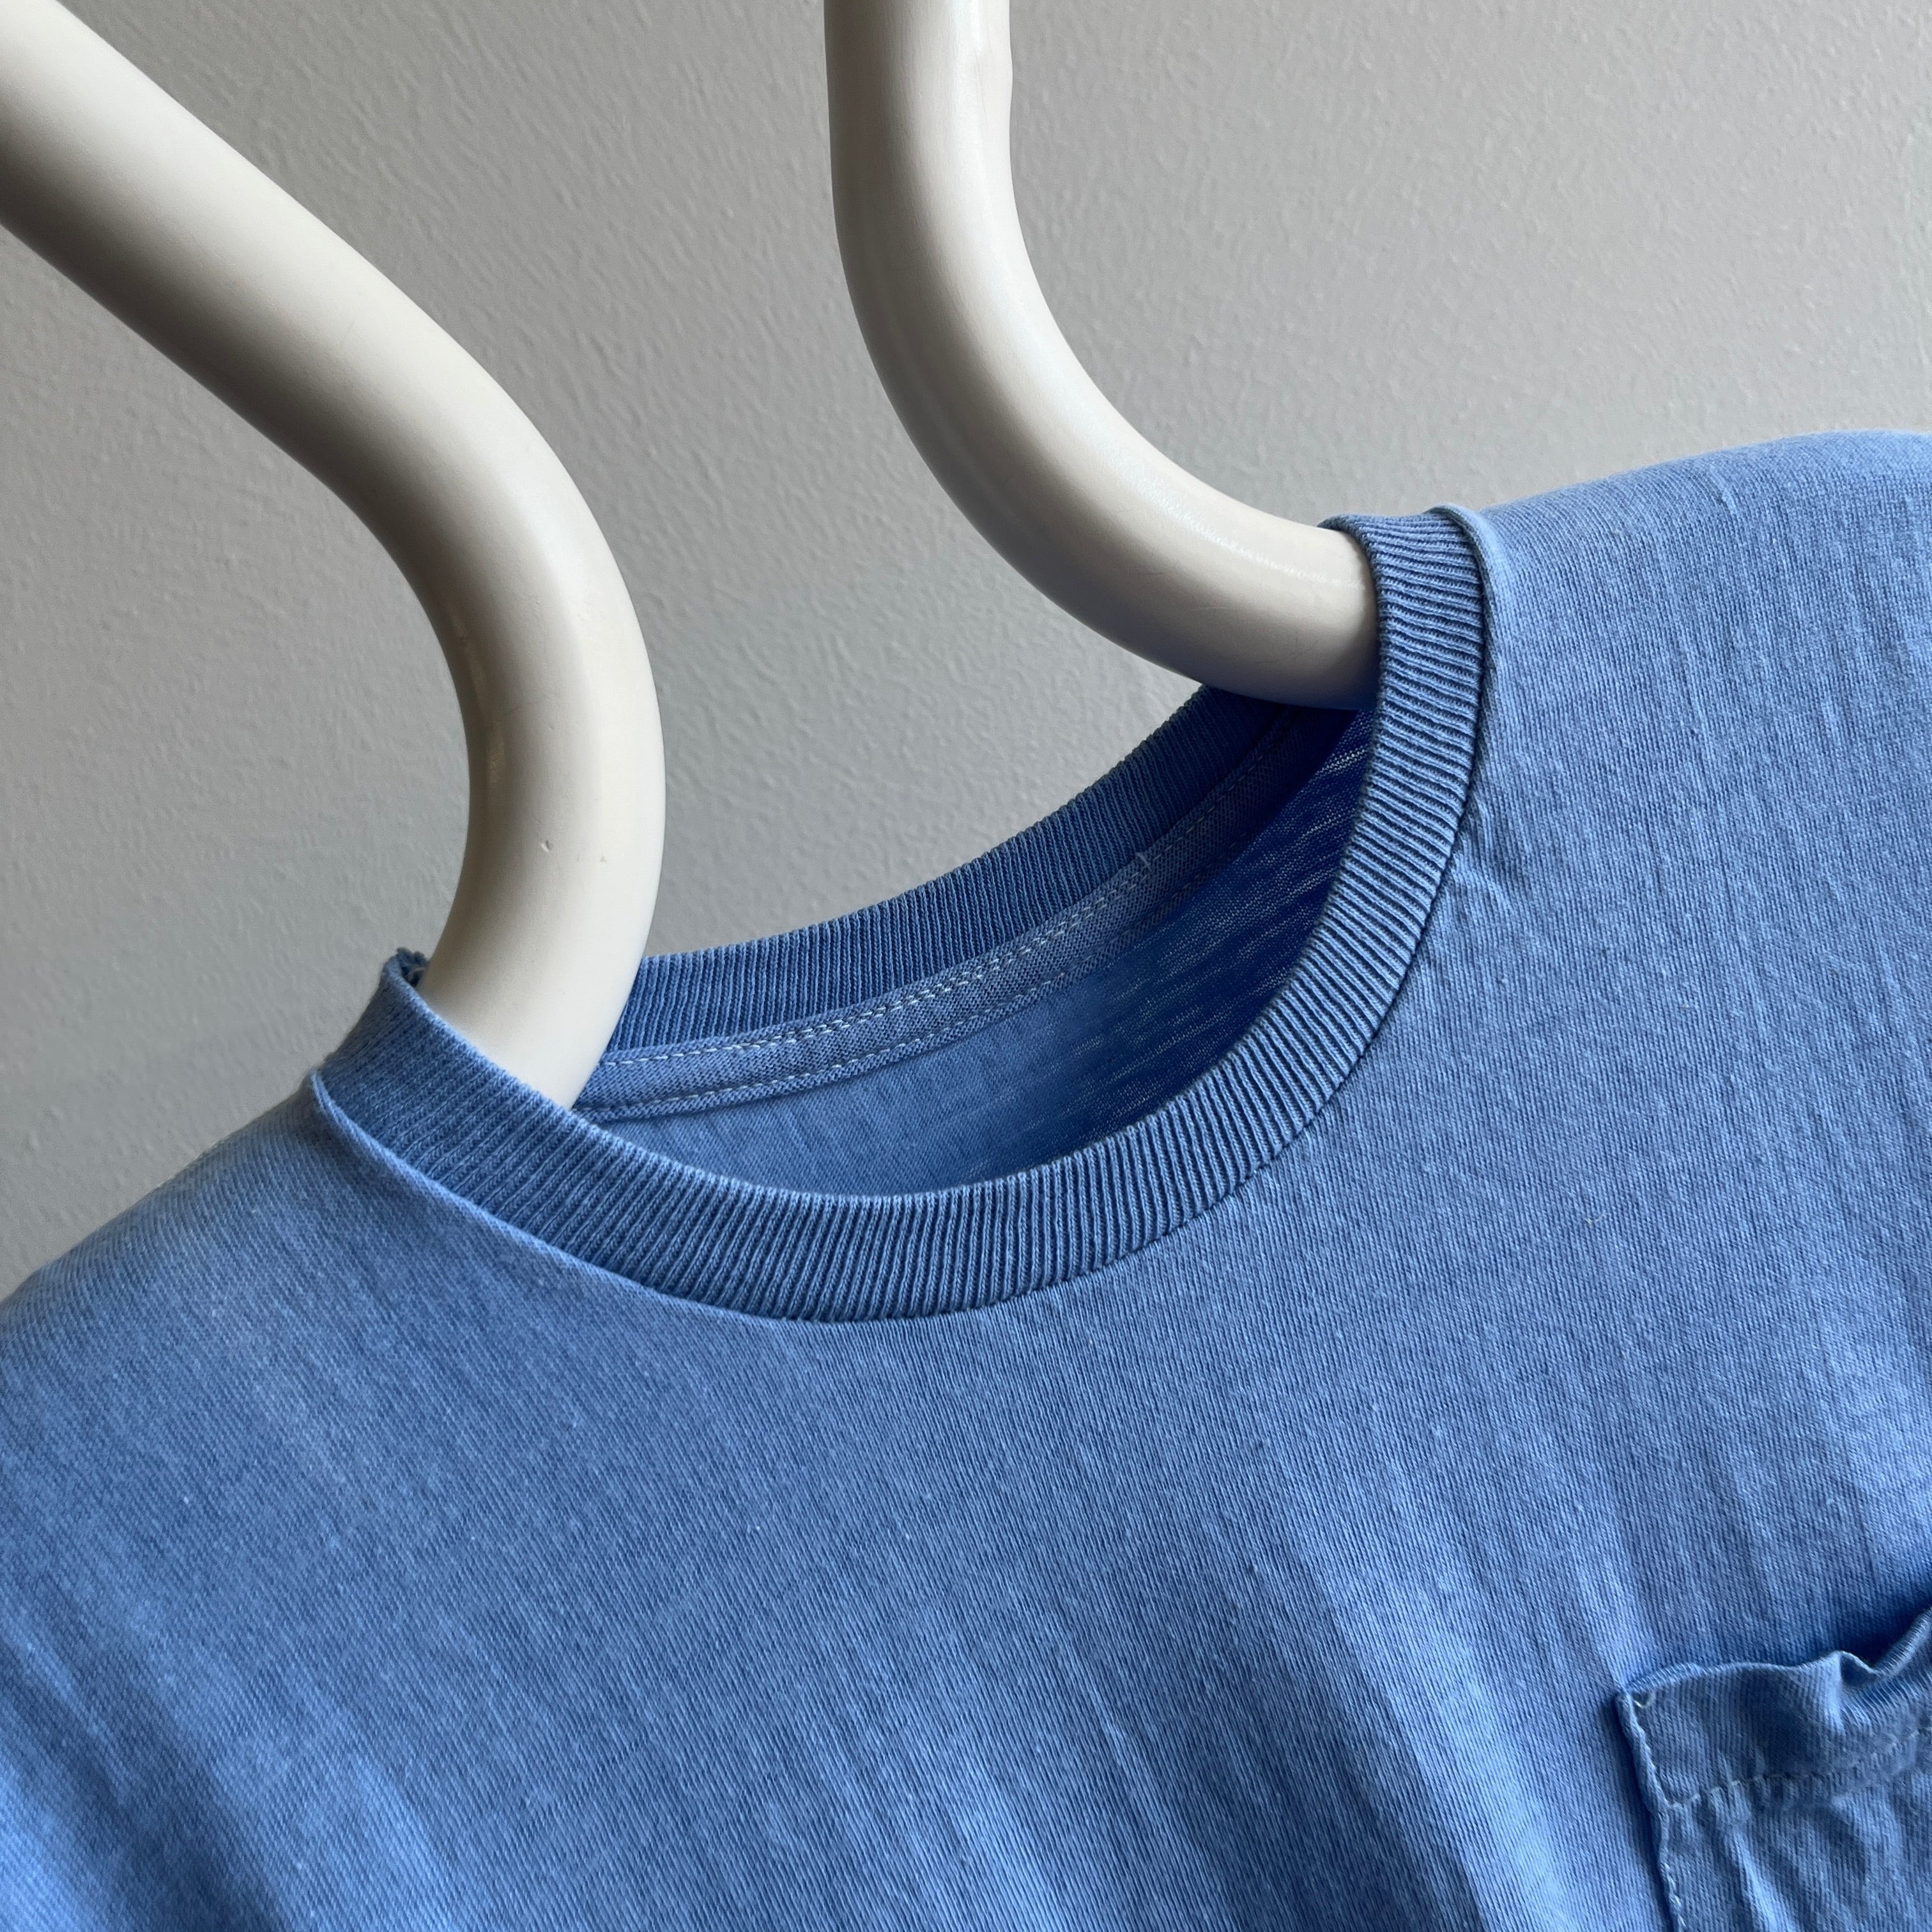 1970/80s Baby Dusty Blue Cotton Ring T-Shirt with a Great Little Pocket